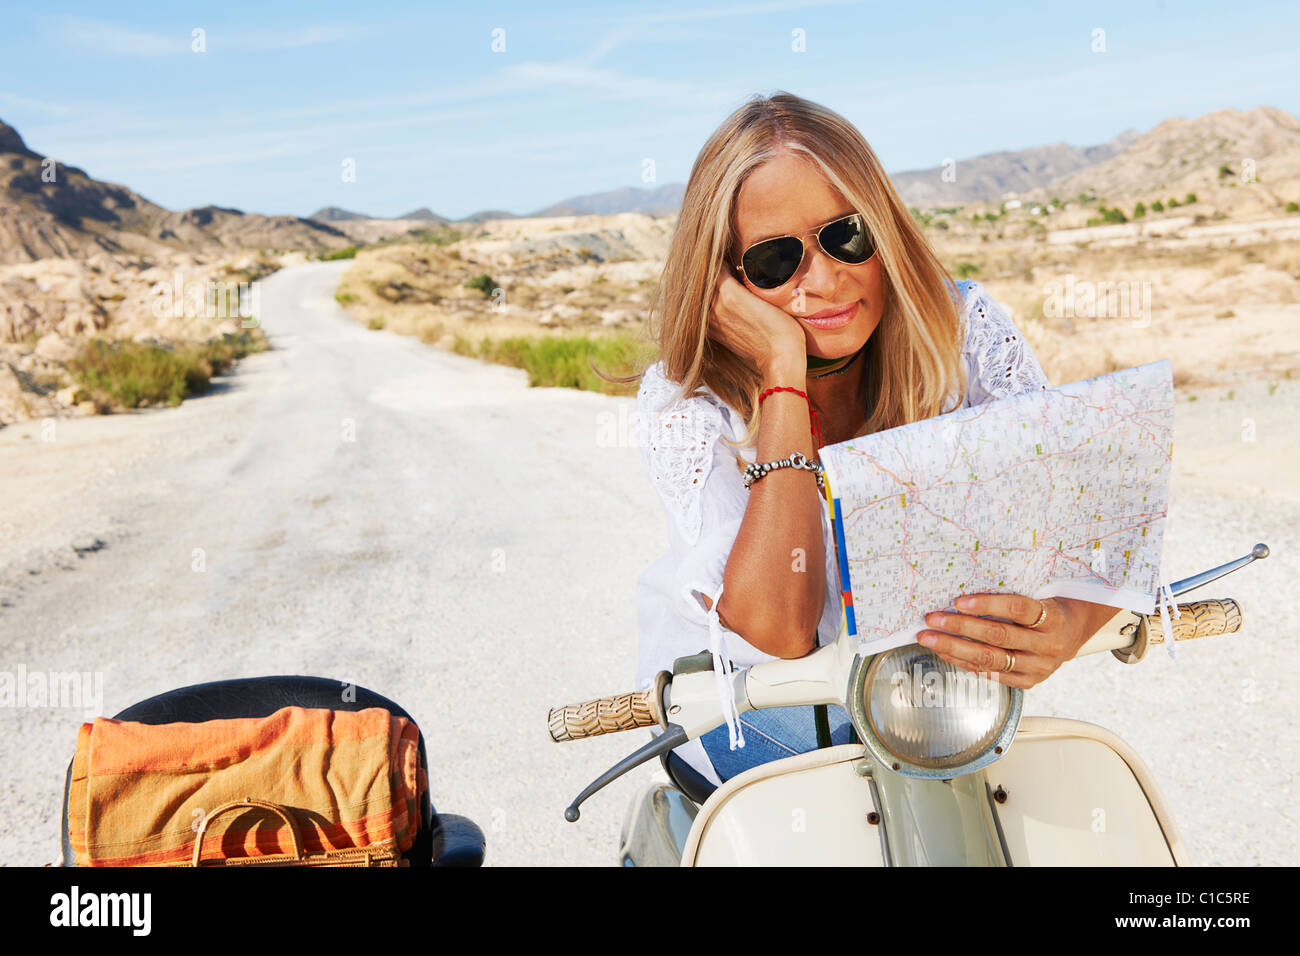 Woman Sitting on motorbike with map Stock Photo